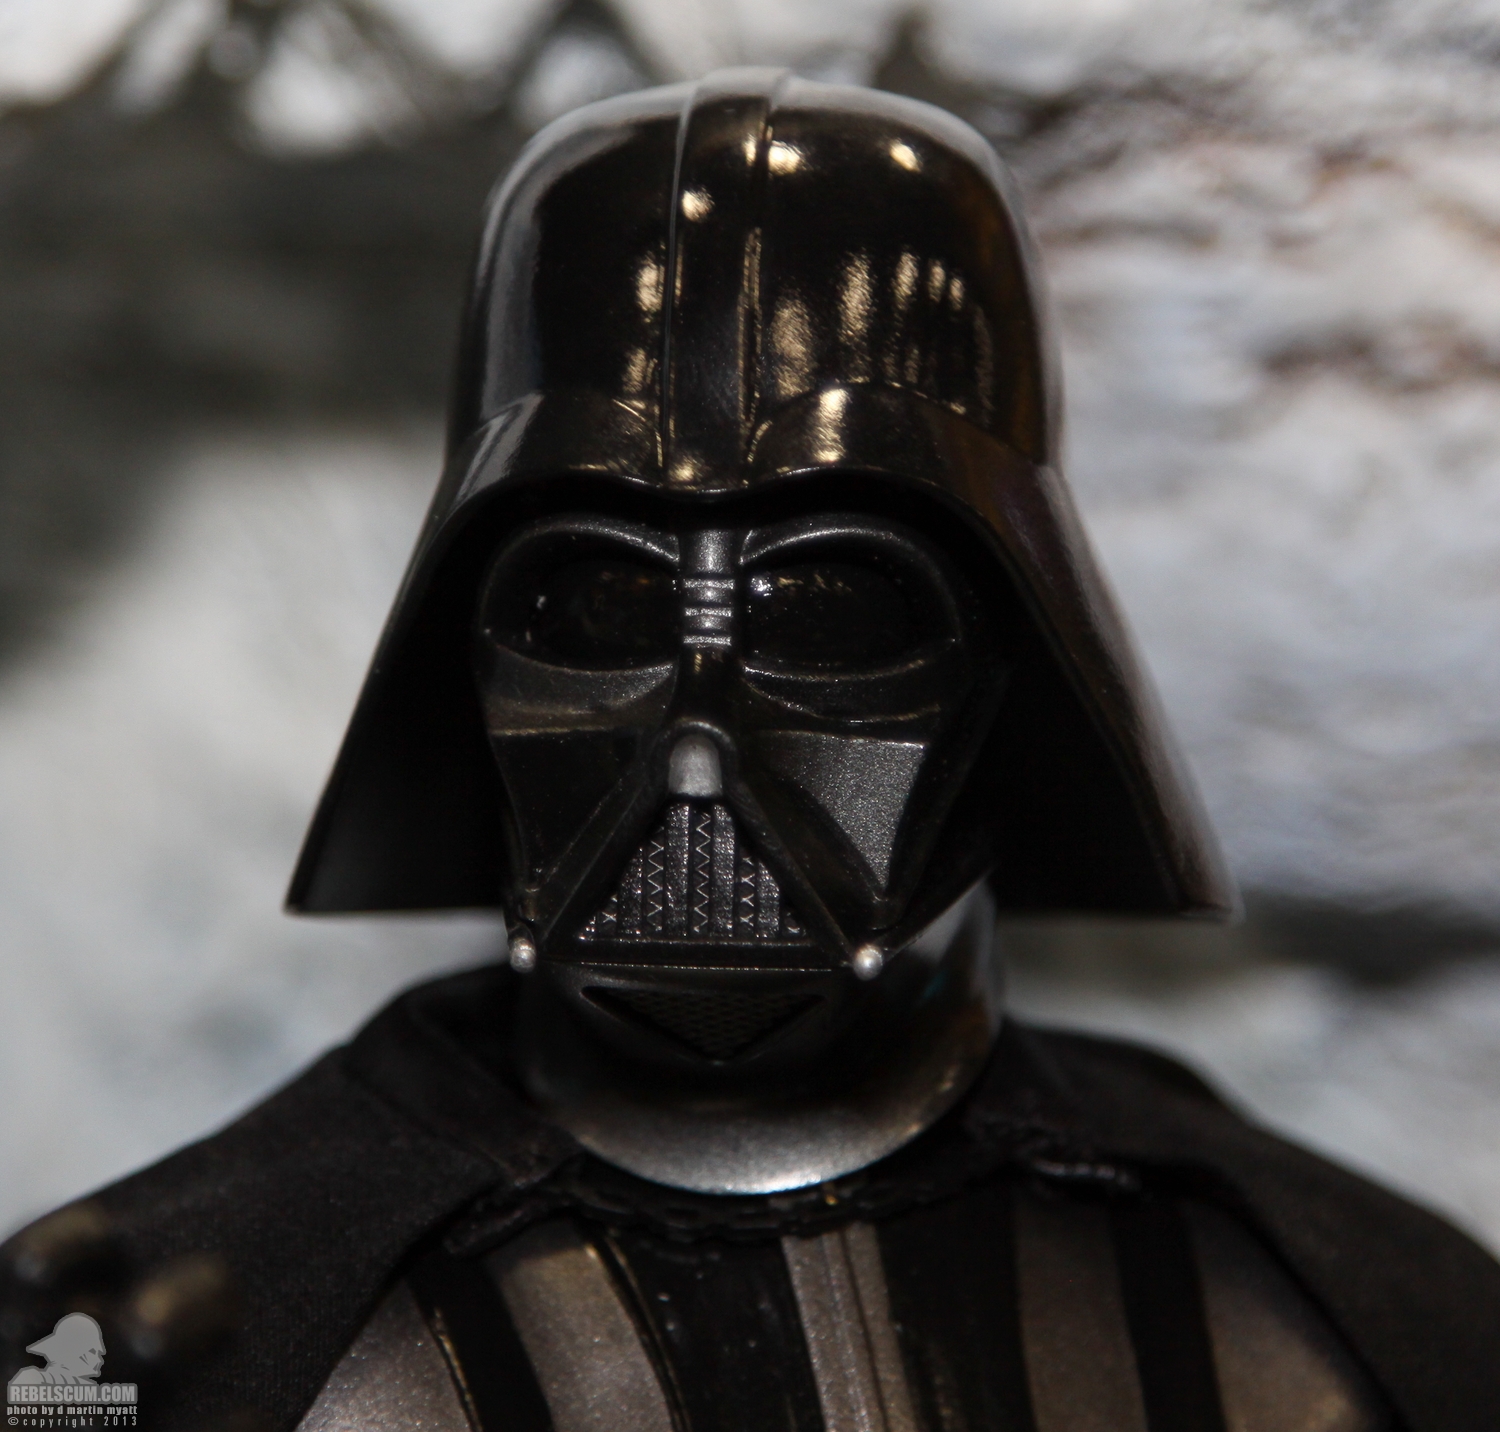 SDCC_2013_Sideshow_Collectibles_Star_Wars_Wed-023.jpg